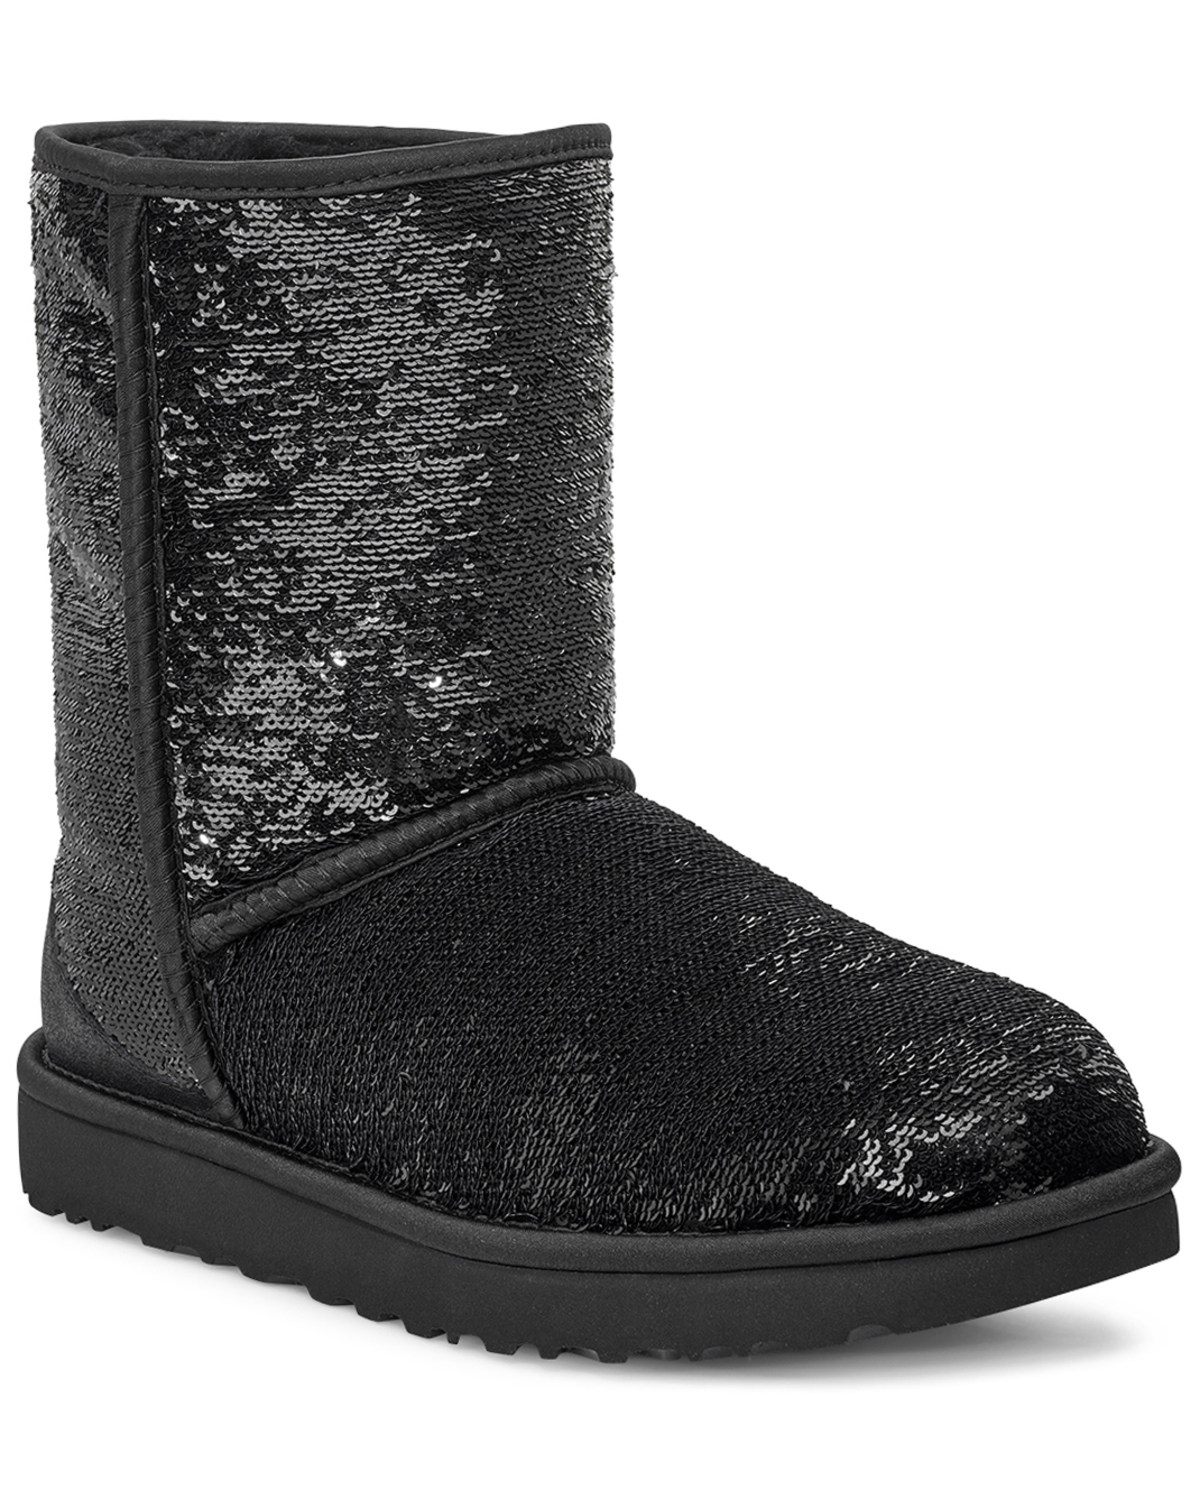 white sequin ugg boots